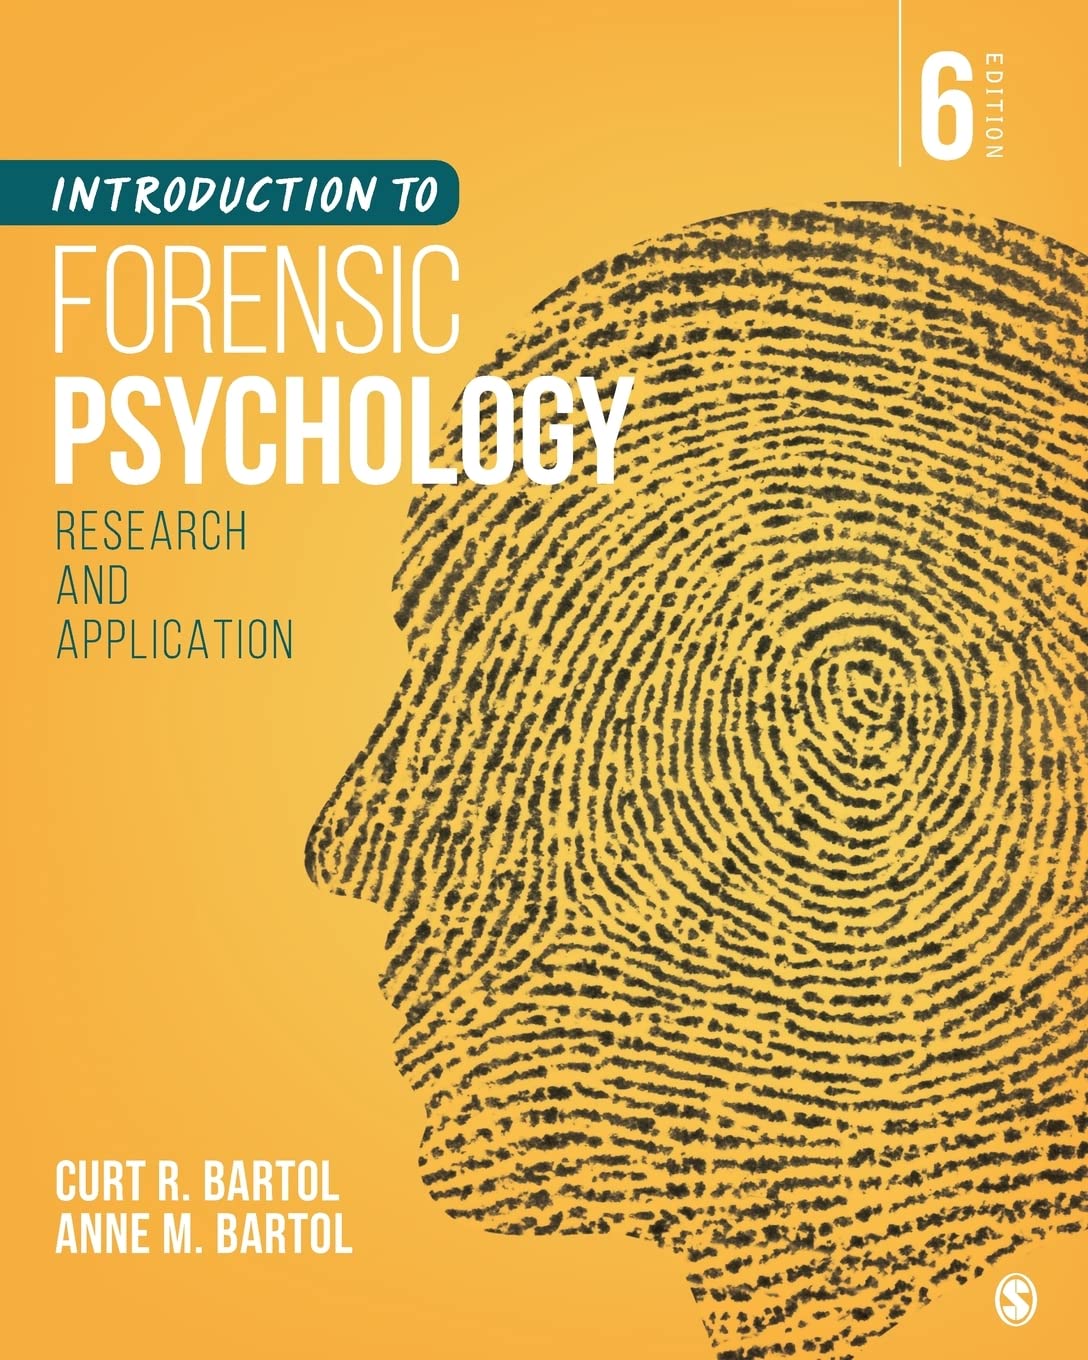 Introduction to Forensic Psychology: Research and Application, book cover